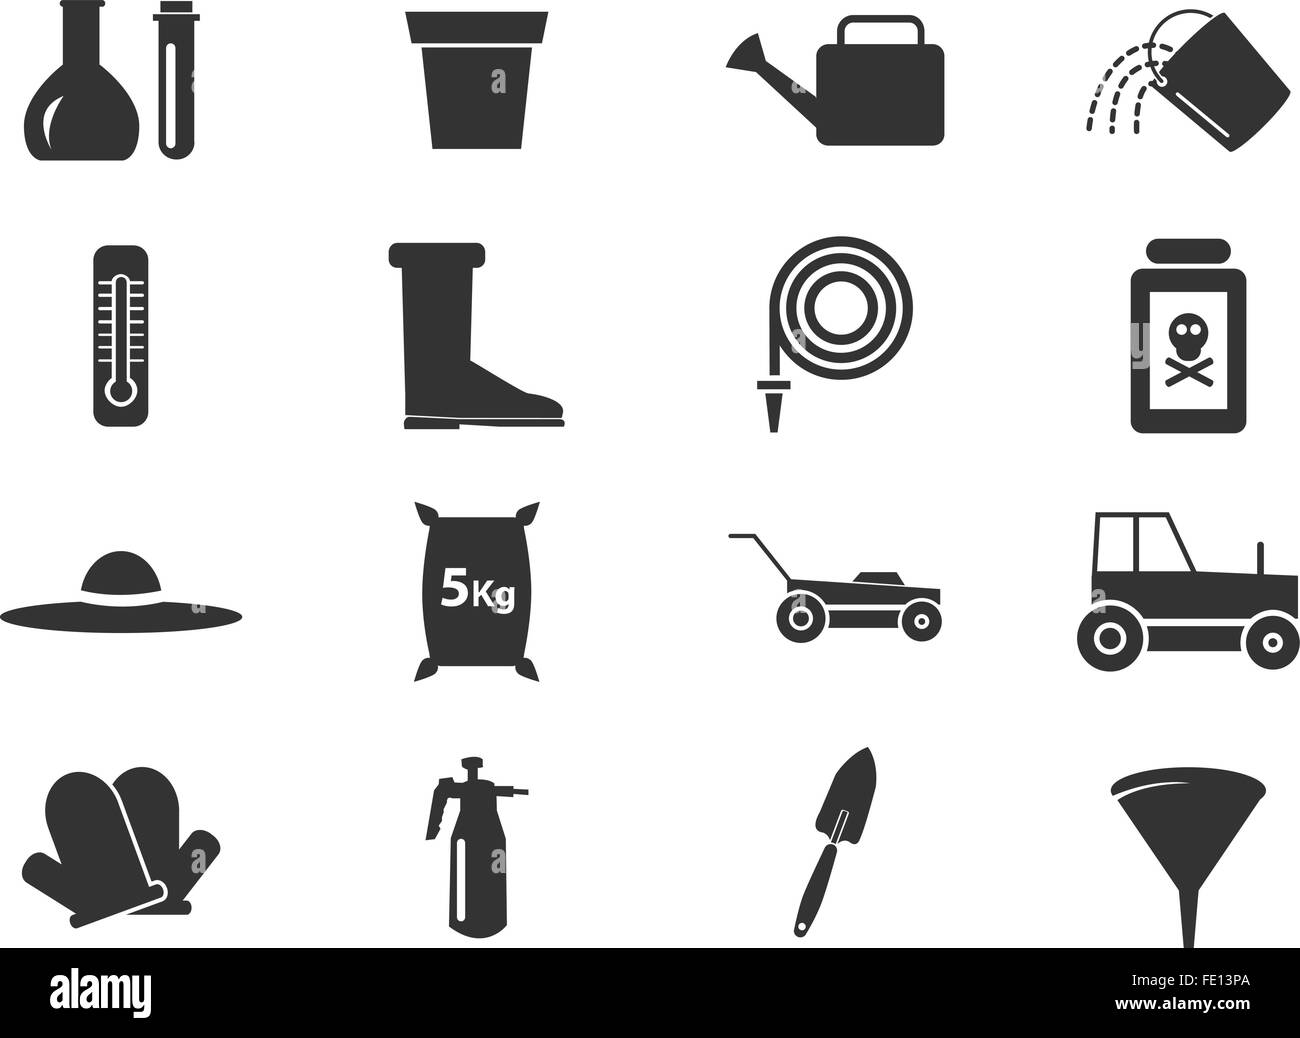 Gardening tools collection Stock Vector